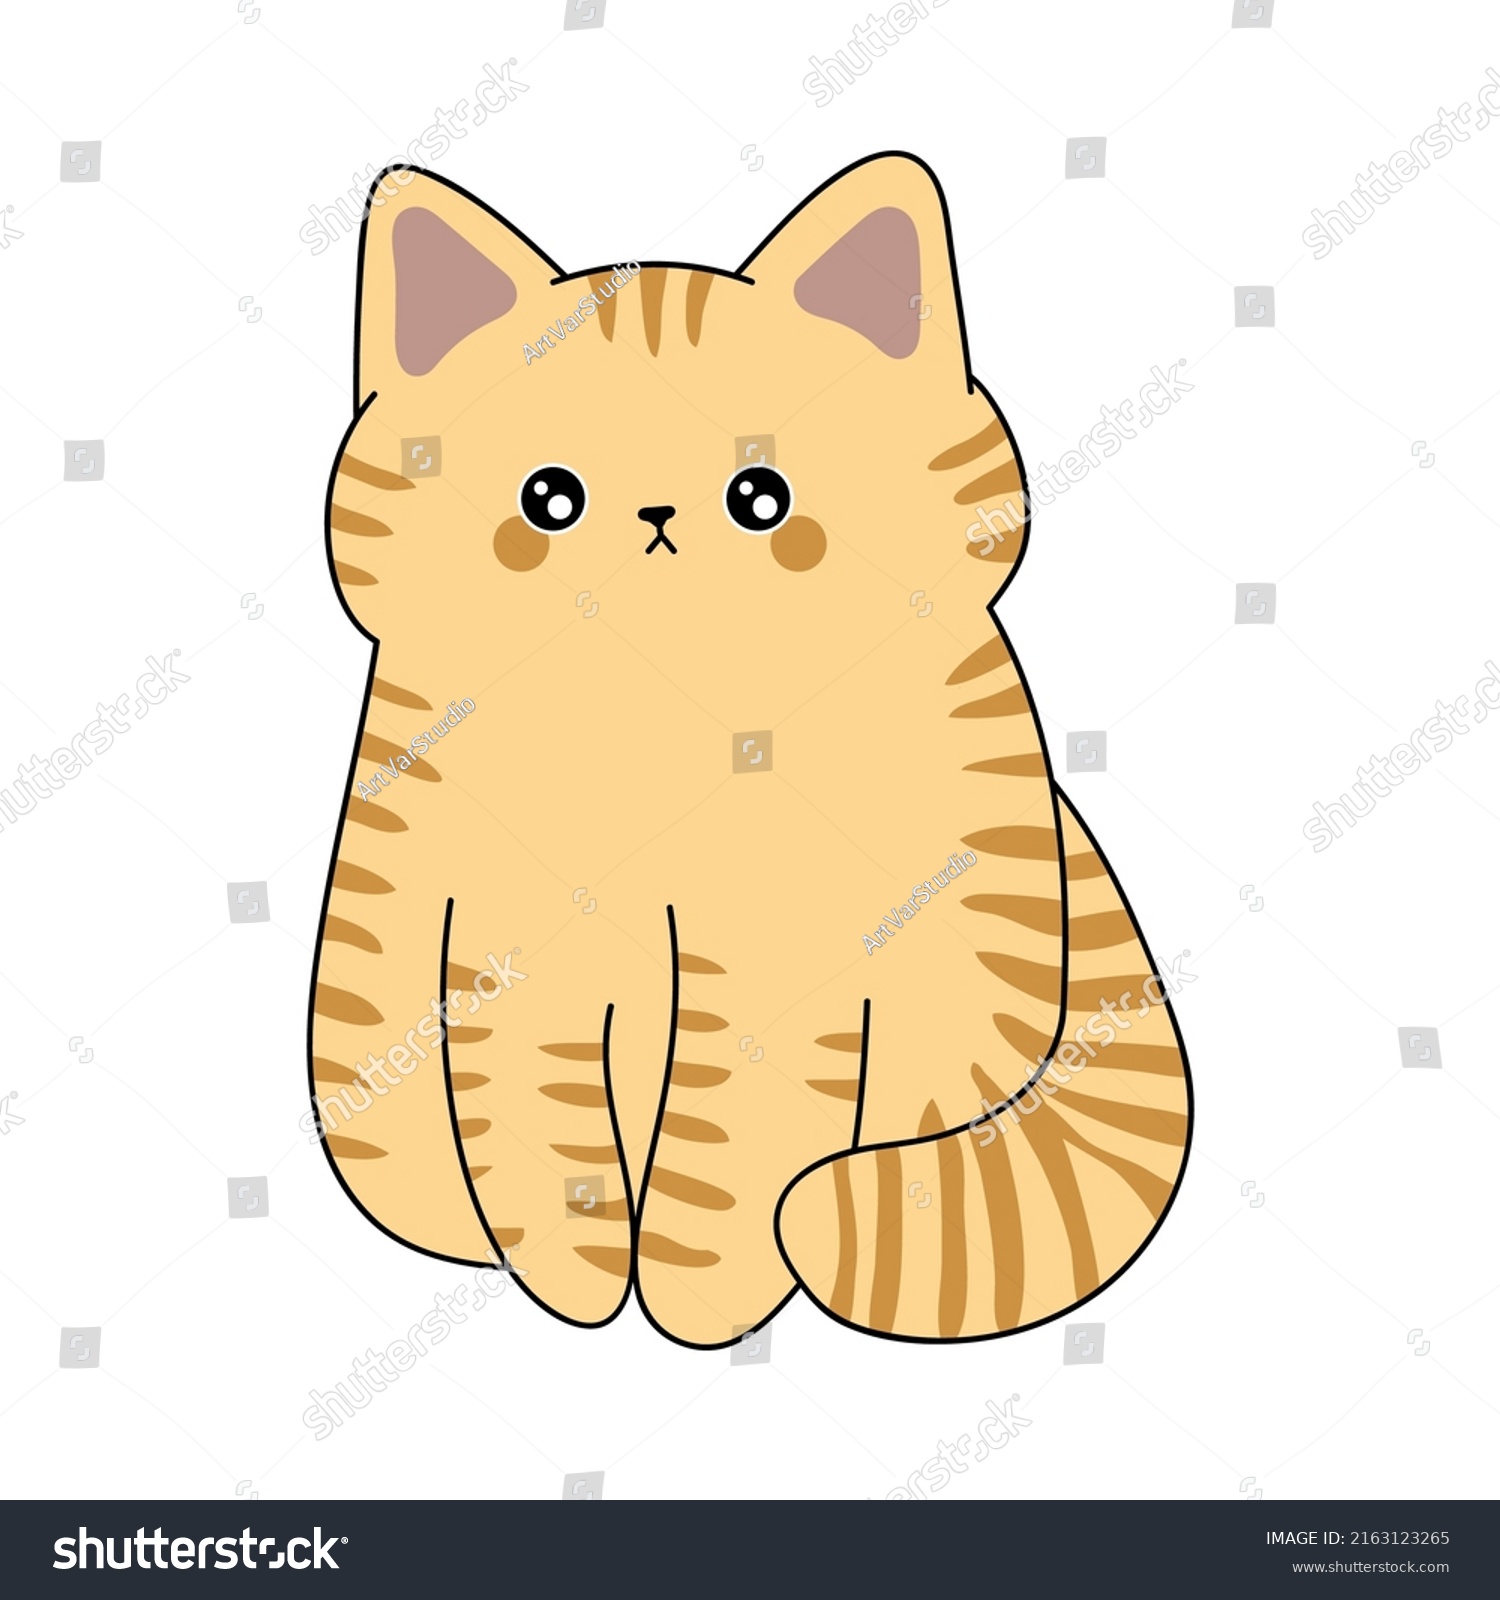 SVG of European shorthair cat illustration. Vector illustration of a cute kitten. Cute little illustration of cat for kids, baby book, fairy tales, covers, baby shower invitation, textile t-shirt. svg